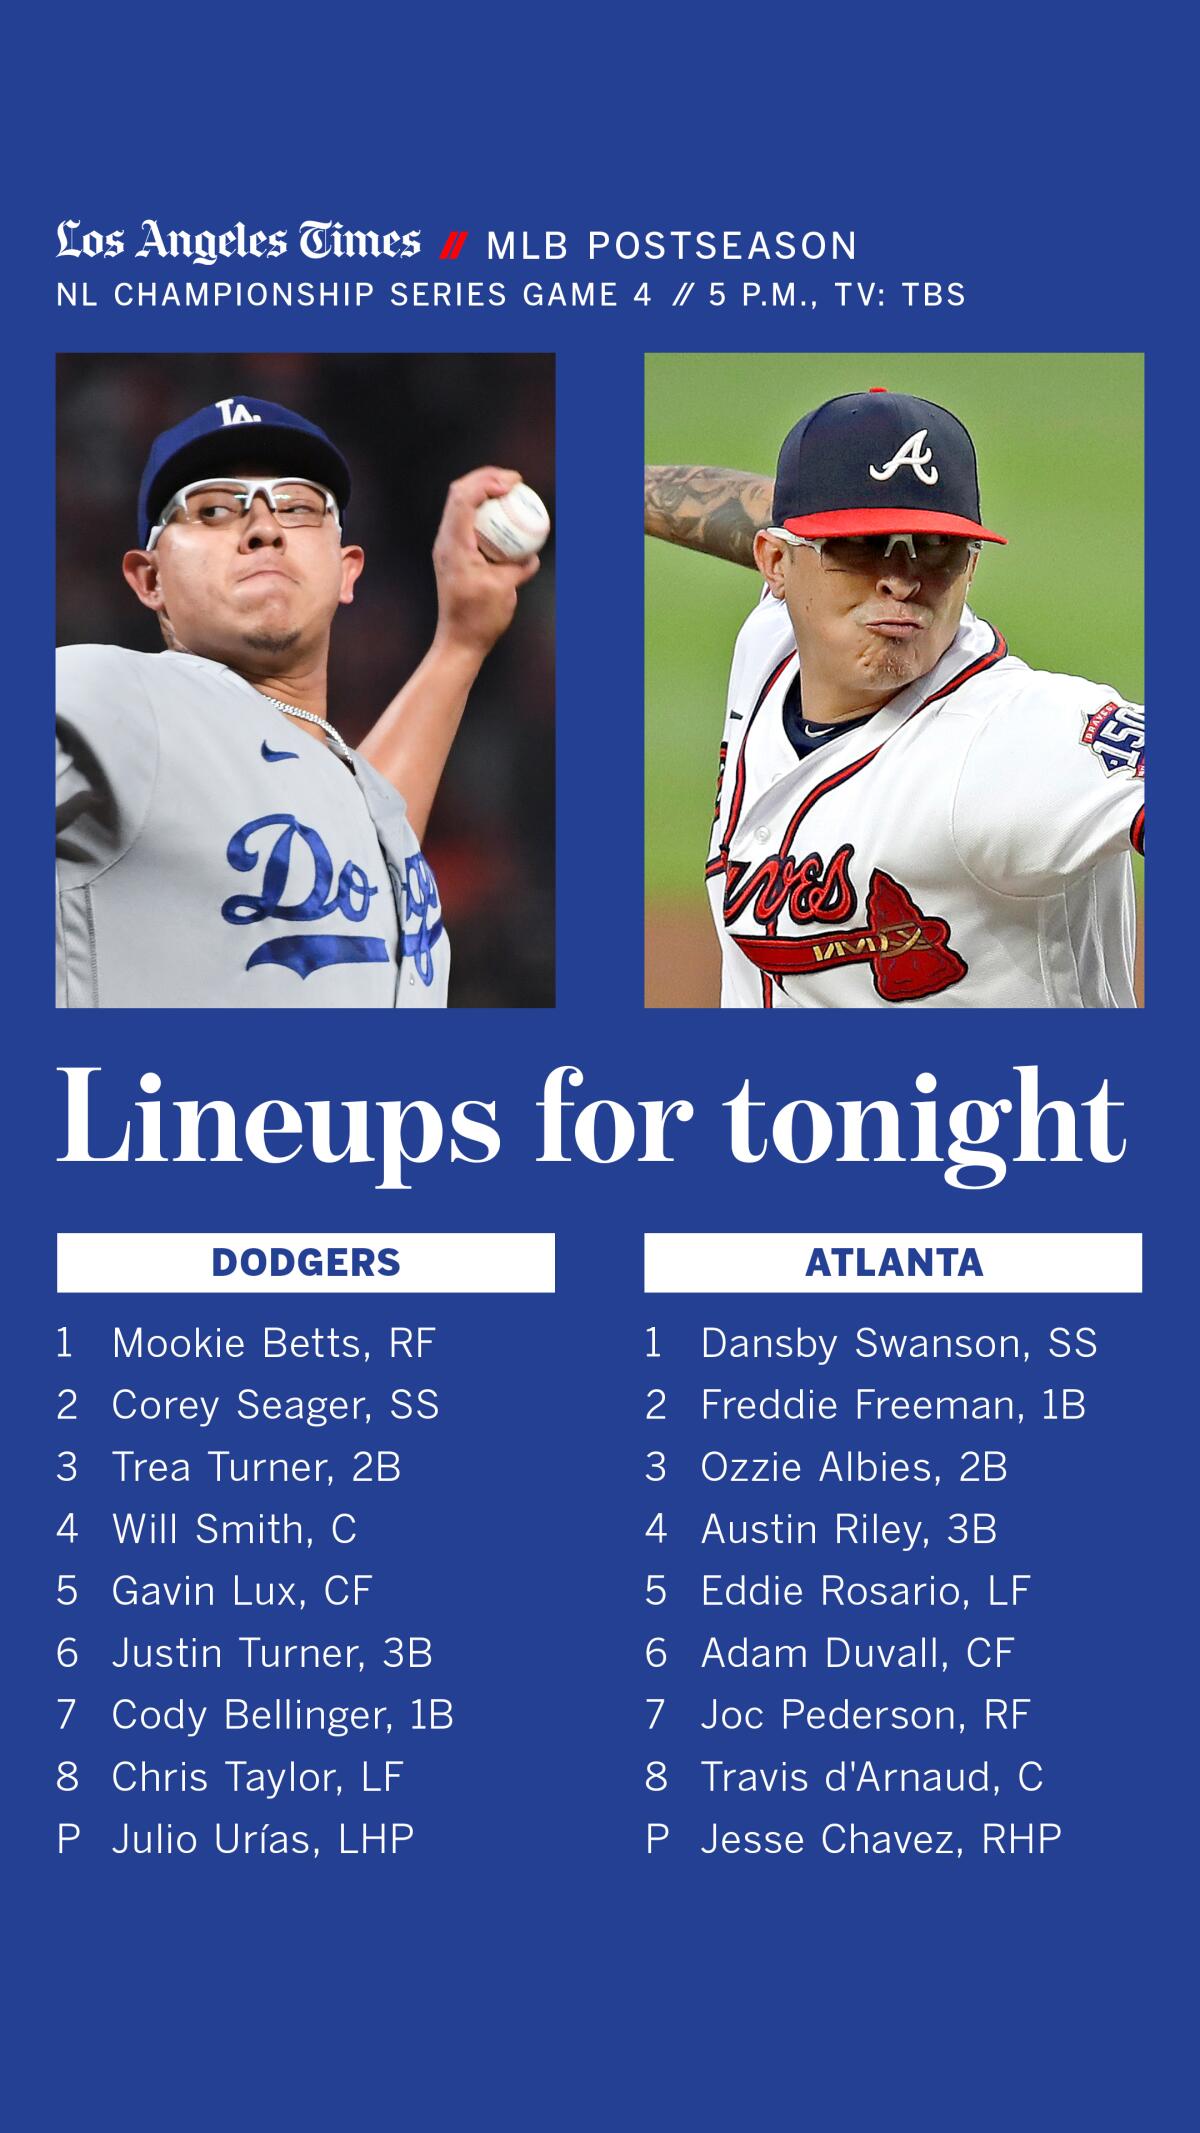 Dodgers vs. Braves, Game 4 of the NLCS lineup.